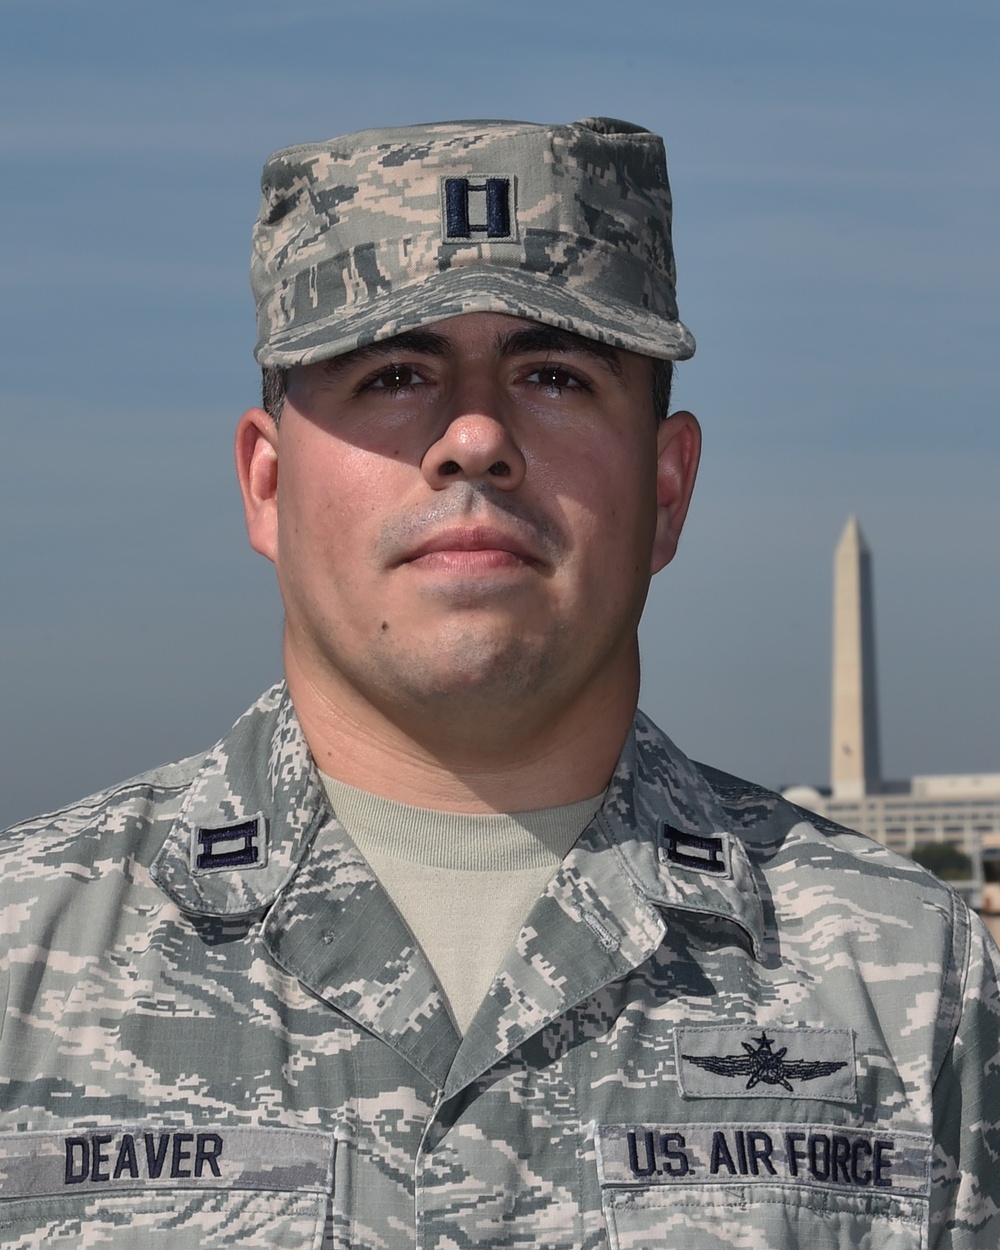 Air Force Captain Deaver supports the 58th Presidential Inauguration